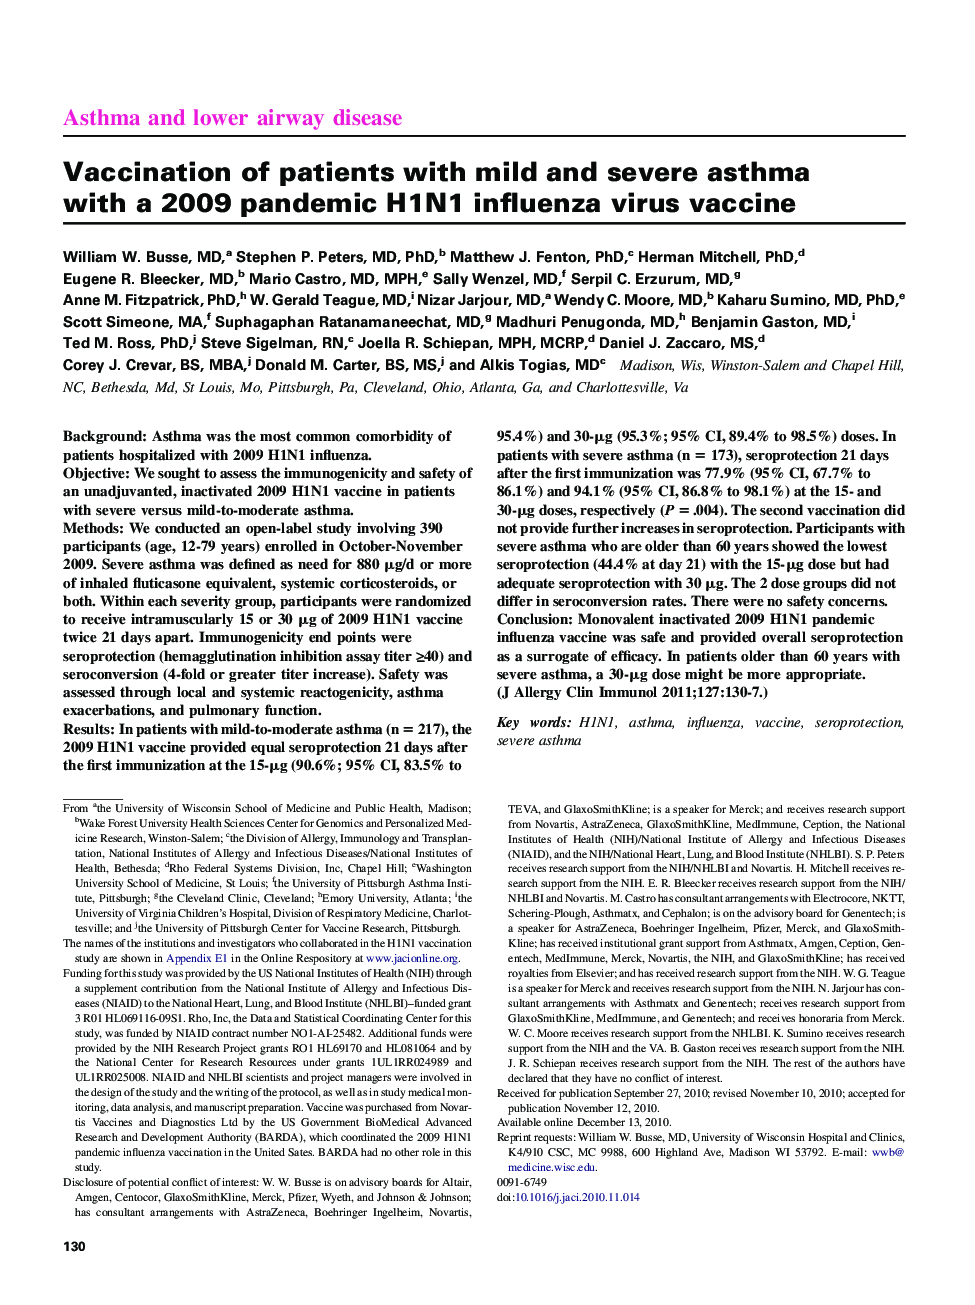 Vaccination of patients with mild and severe asthma with a 2009 pandemic H1N1 influenza virus vaccine